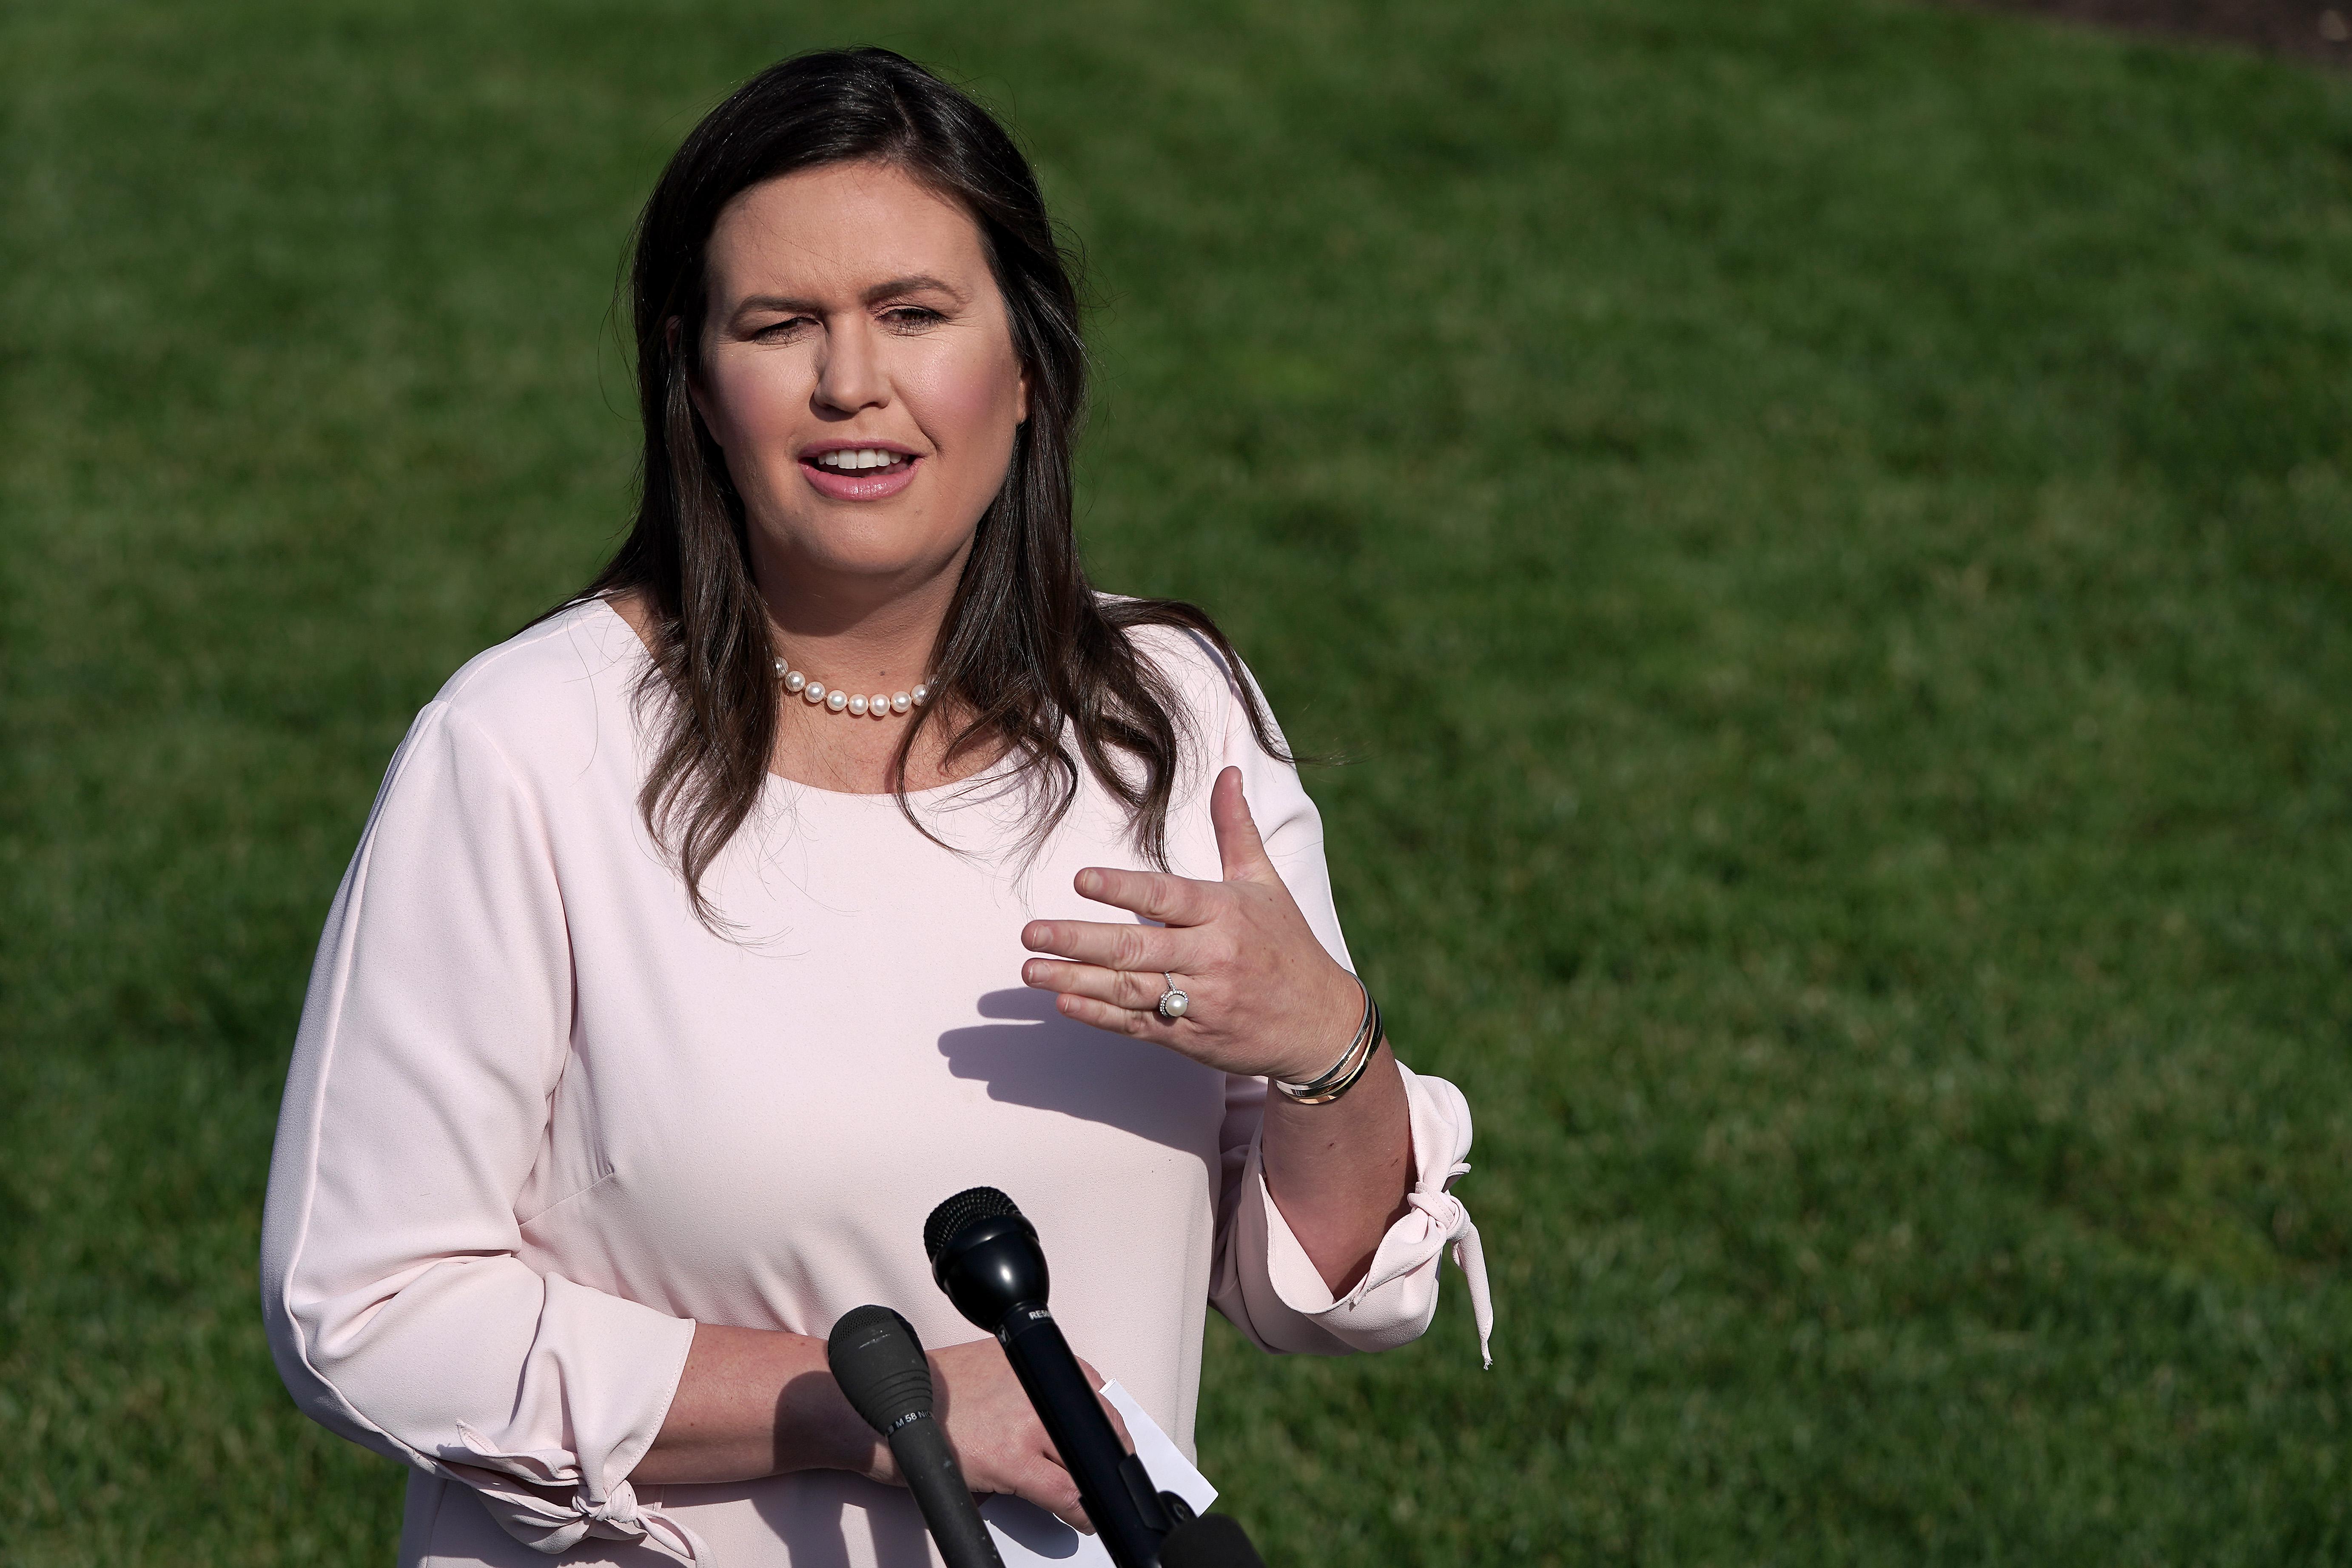 White House press secretary Sarah Huckabee Sanders talks to reporters outside the West Wing May 23, 2019 in Washington, D.C.